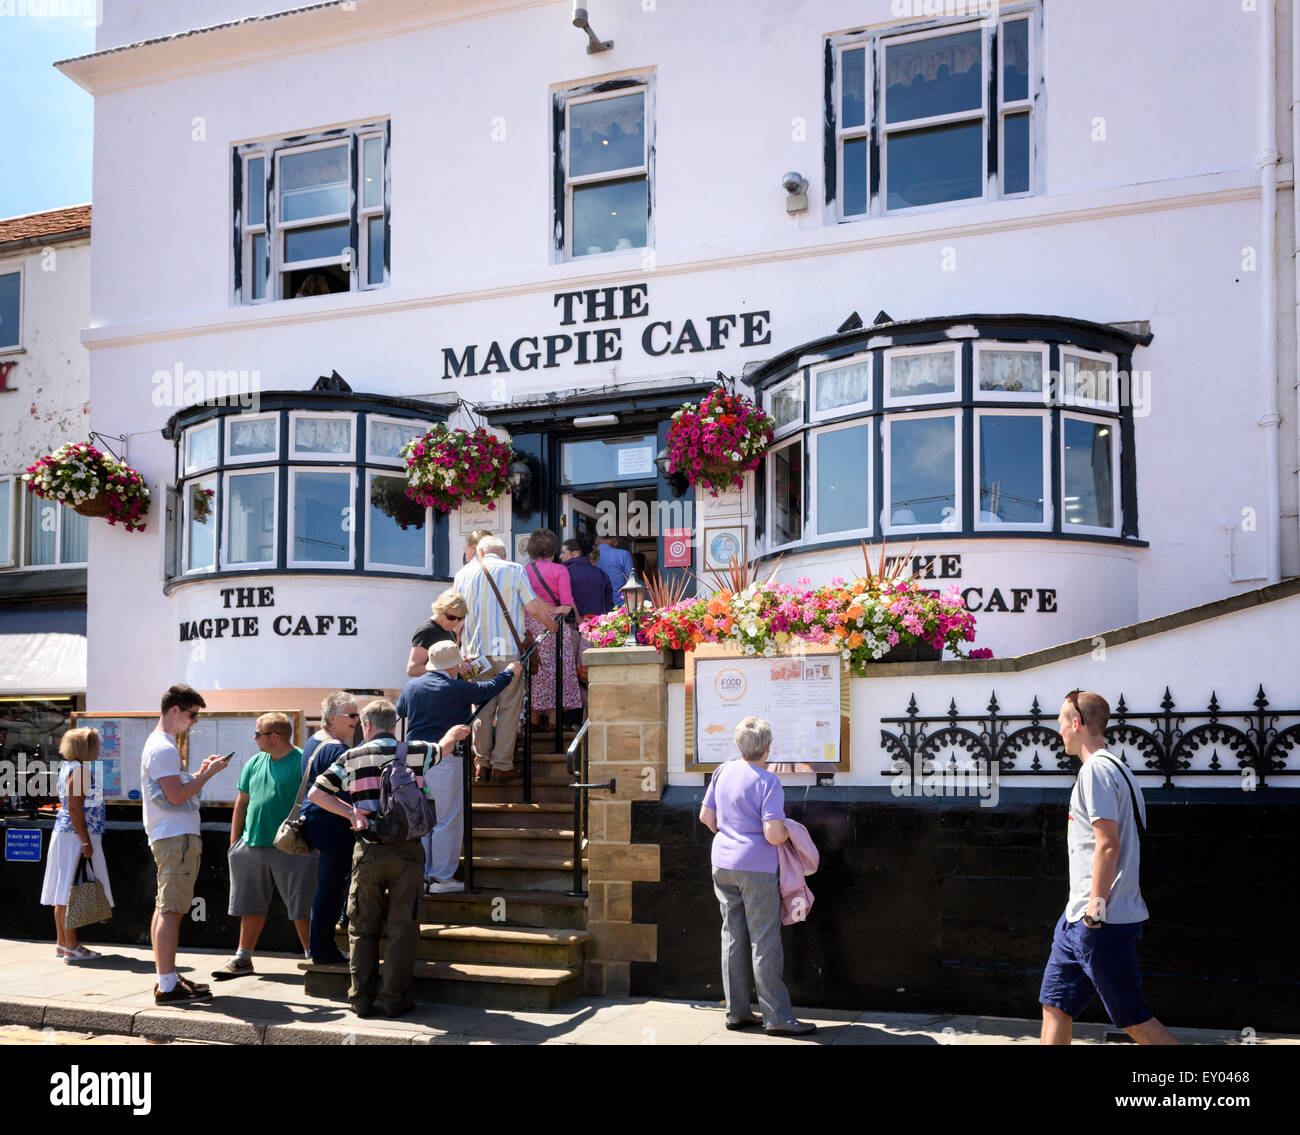 Magpie Cafe, Whitby Stock Photo